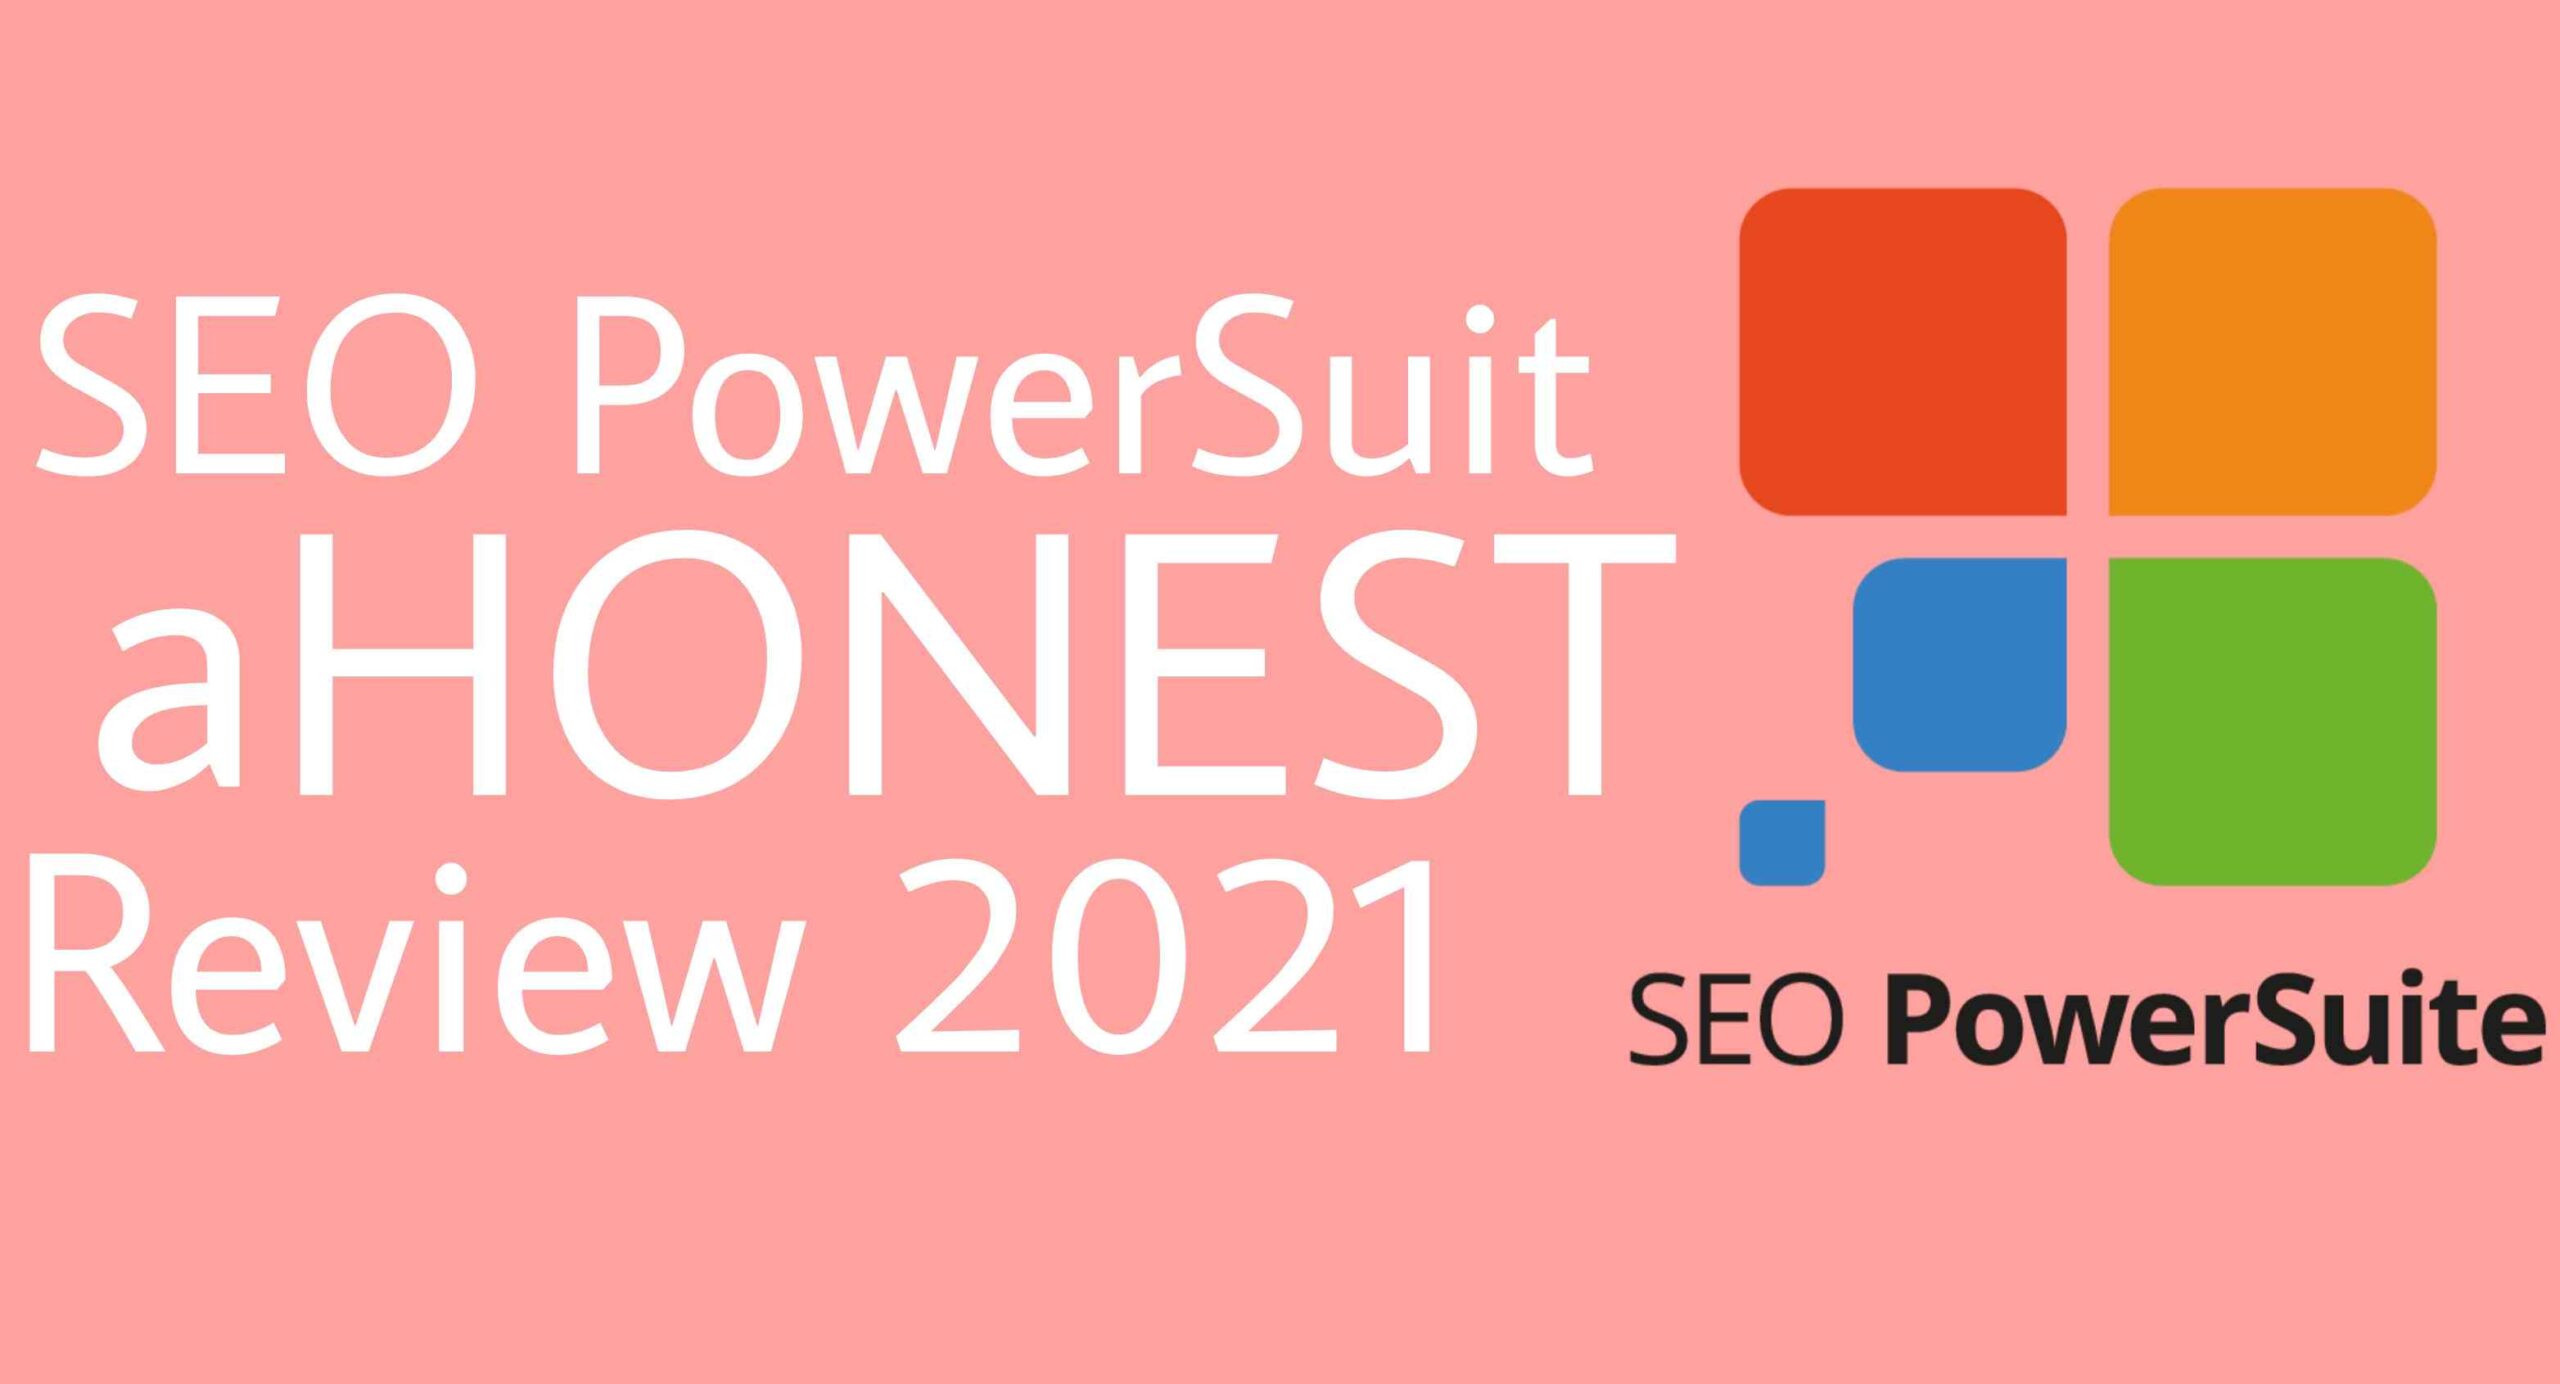 SEO PowerSuite Review – Is SEO PowerSuite For You?